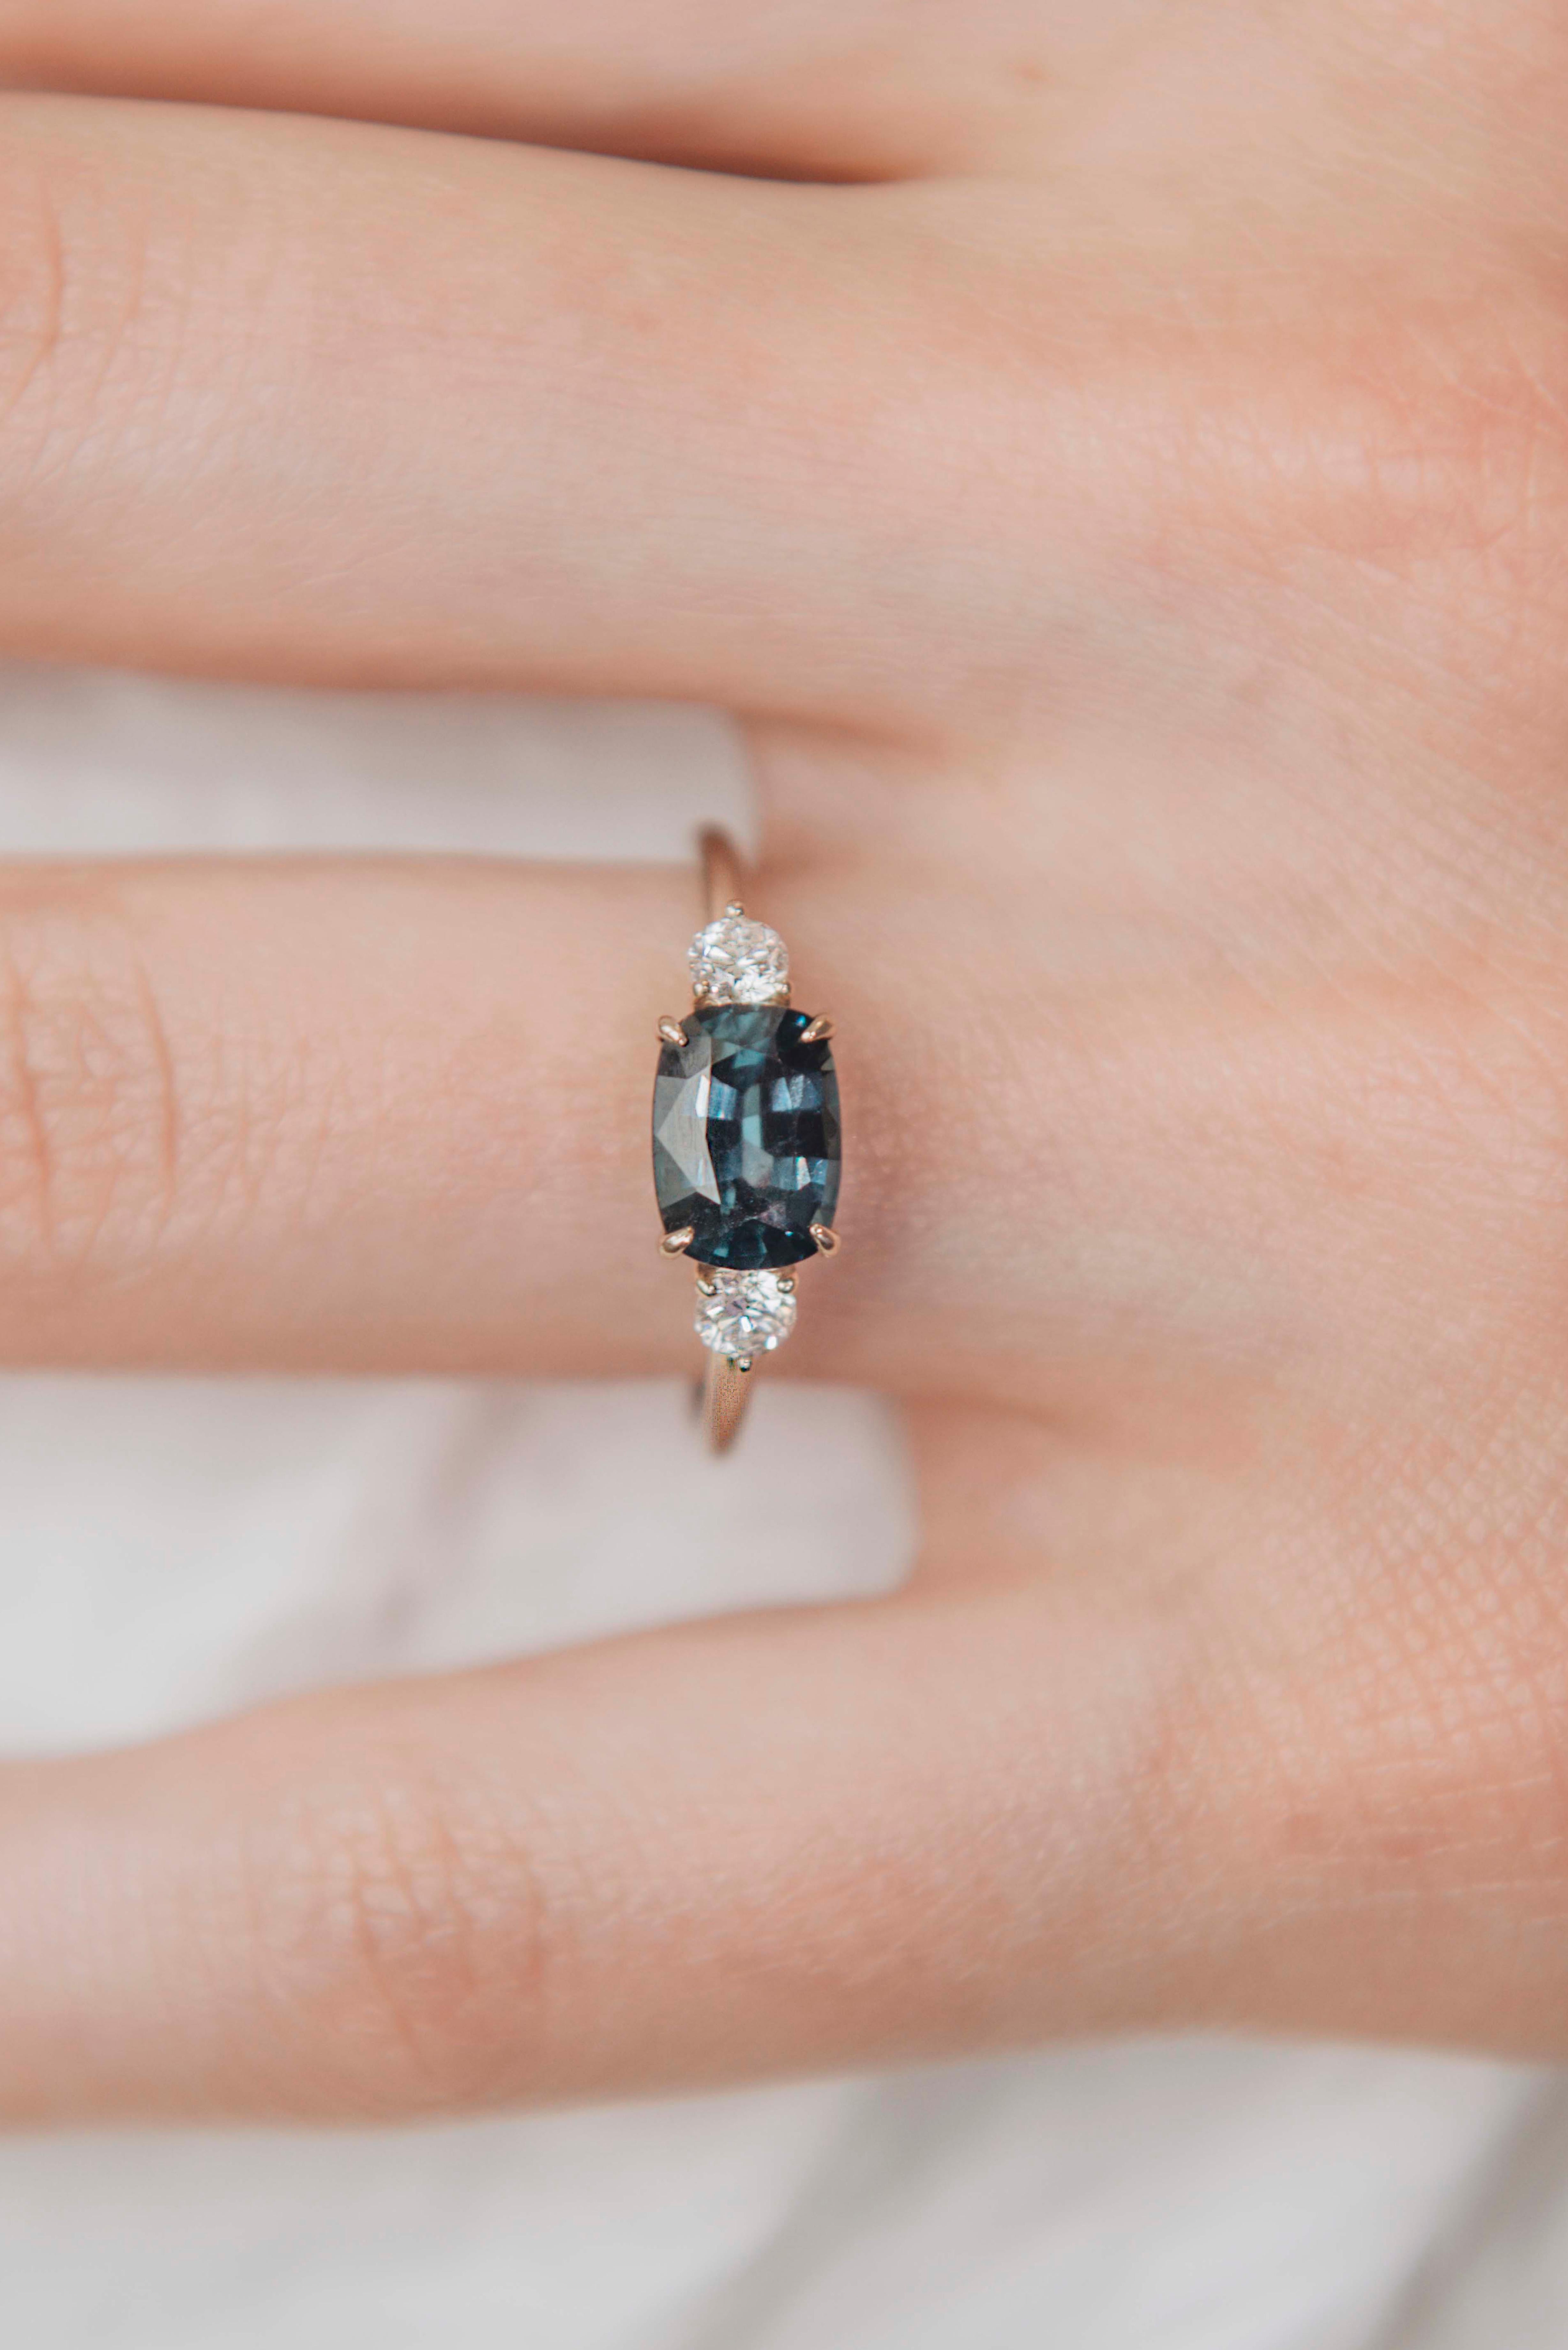 A perfectly made three-stone ring with a well cut no heat 1.33 carat rare teal colored Ceylon spinel flanked by two white diamonds in a comfortable classic low setting in 18k white gold. Pictured without plating with its natural subtle yellowish